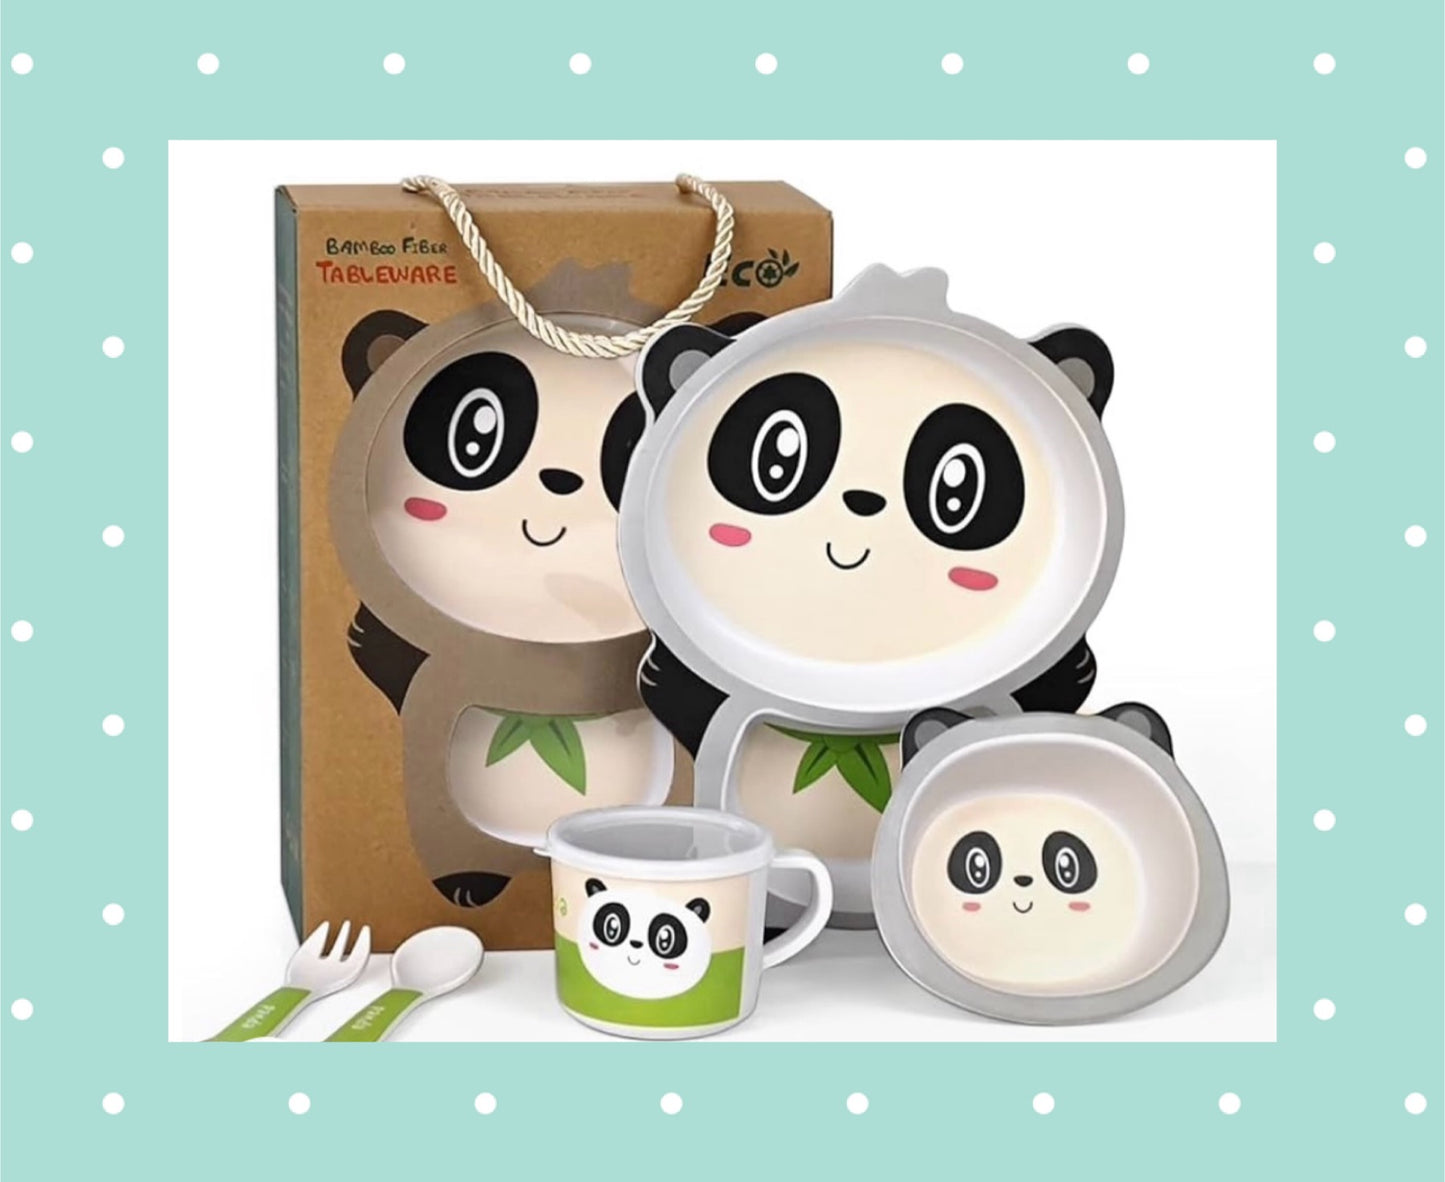 Cute Animal 5 piece Bamboo Fiber Dinnerware Plate and Bowl Set - eco friendly / non toxic